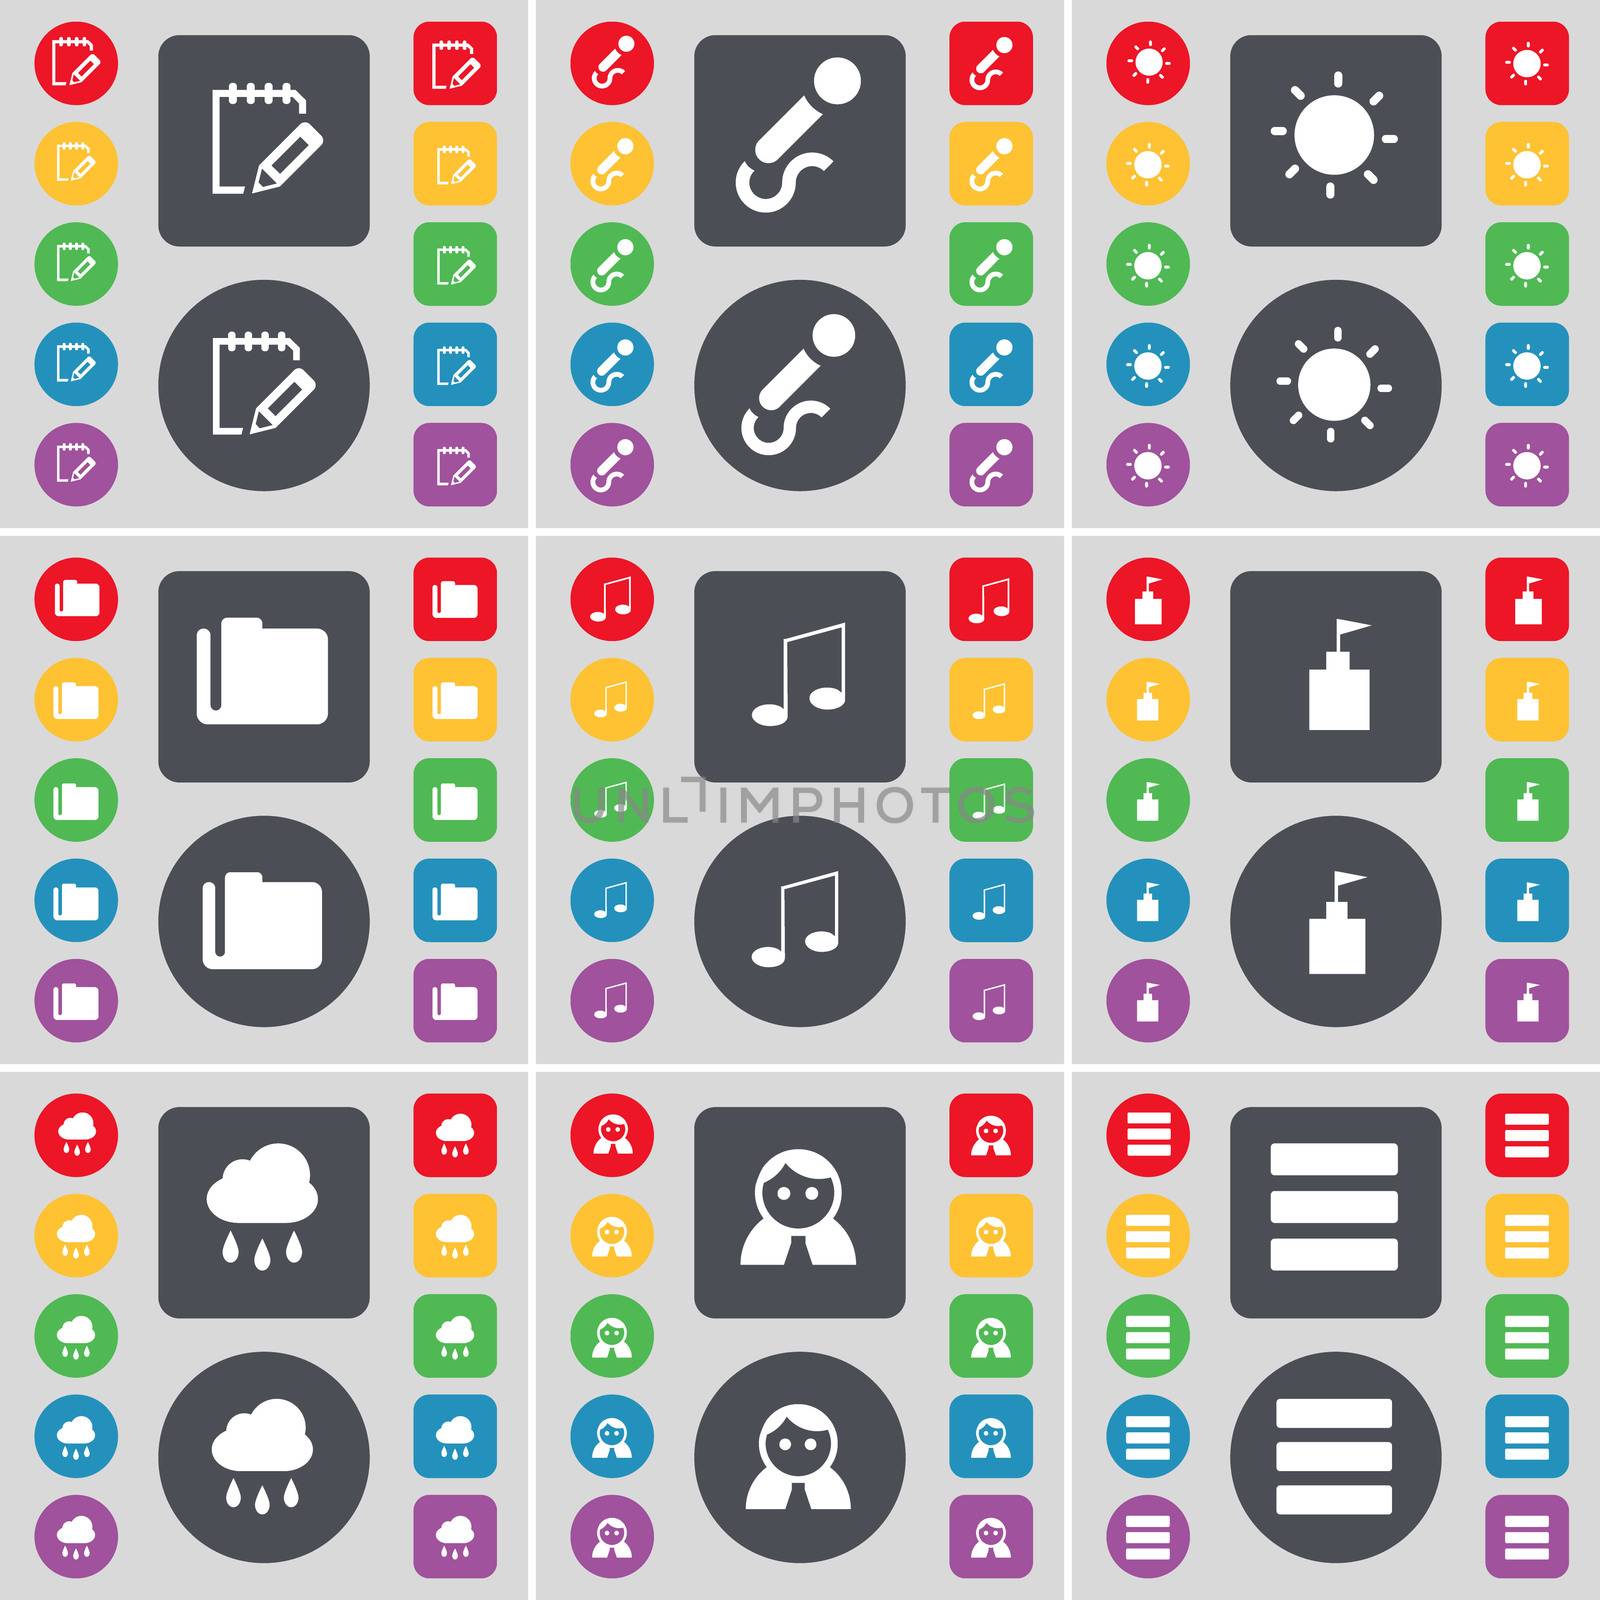 Notebook, Microphone, Light, Folder, Note, Flag tower, Cloud, Avatar, Apps icon symbol. A large set of flat, colored buttons for your design. illustration